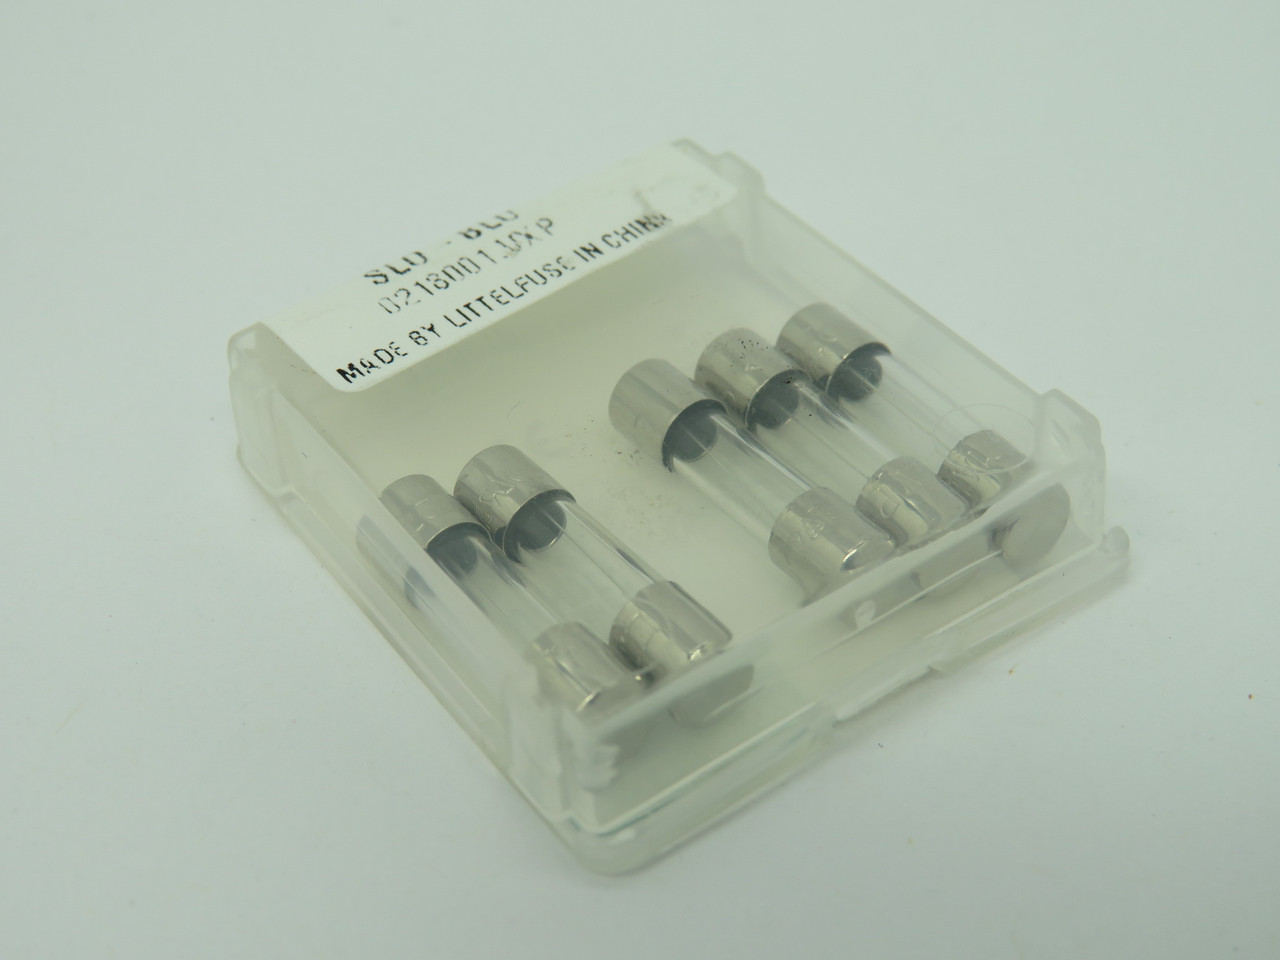 Littelfuse 0218001.VXP Time Delay Glass Fuse 1A 250V 5-Pack NEW